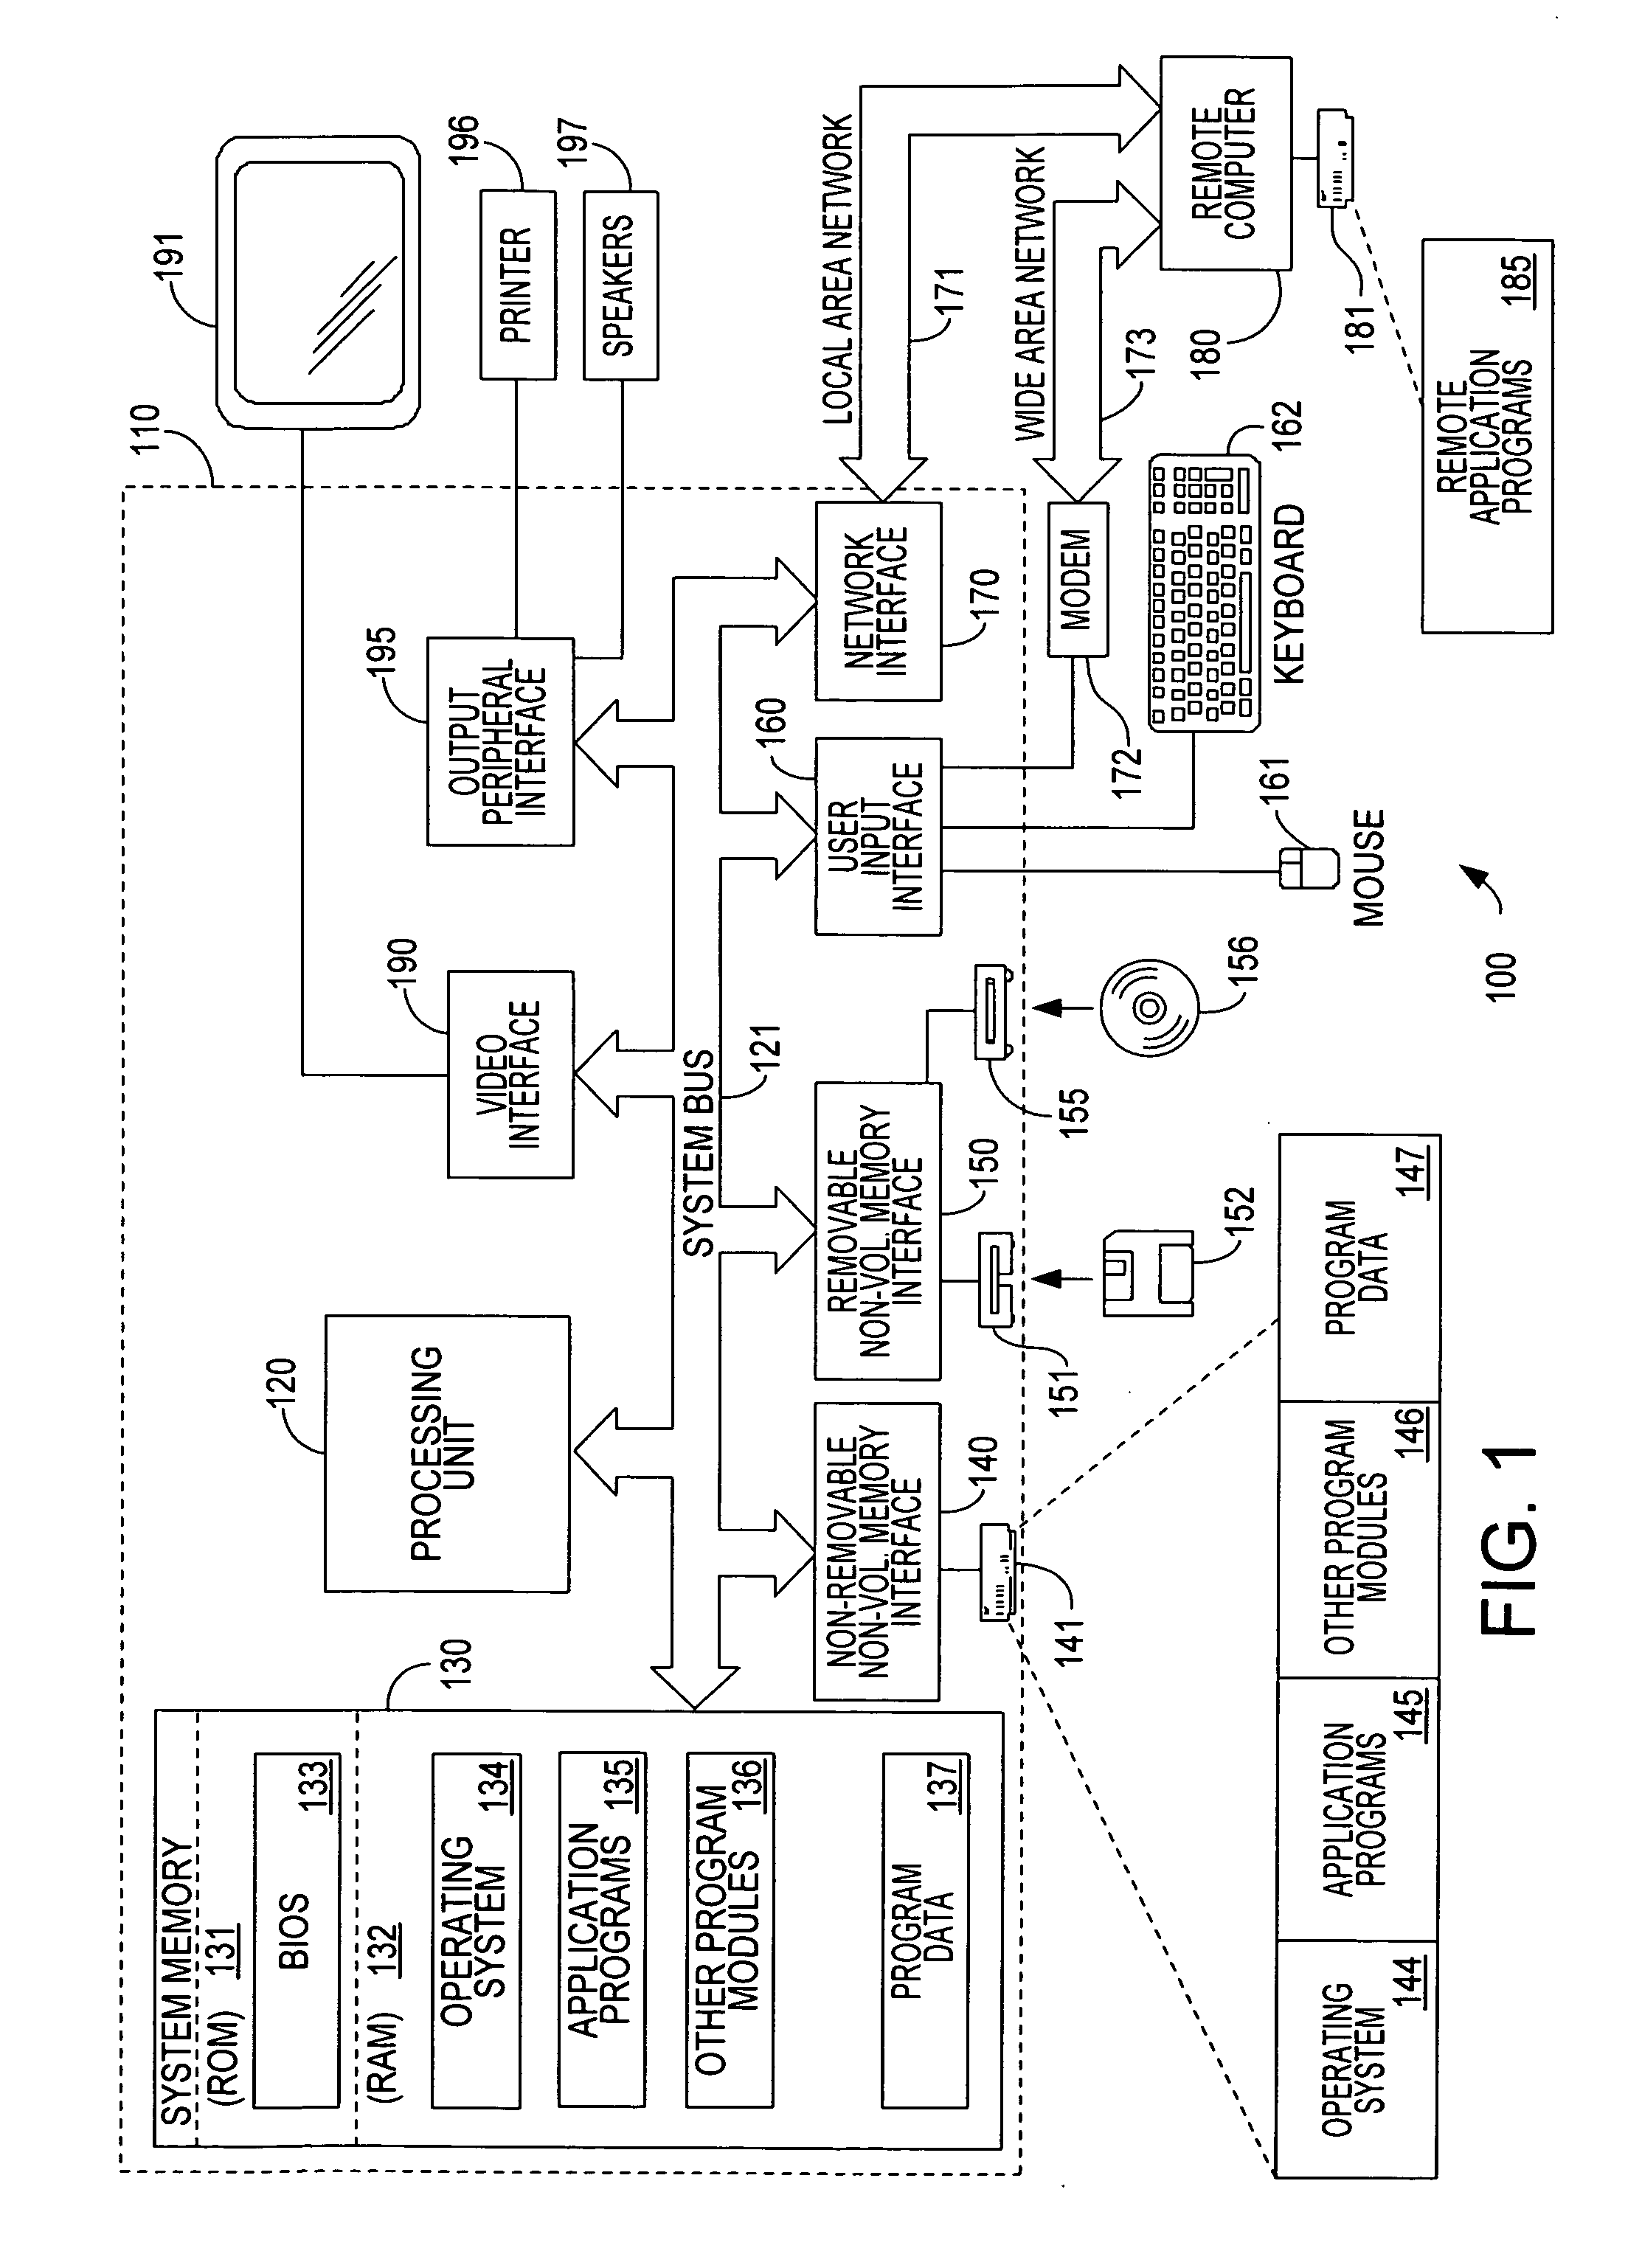 System and method for intelligent recommendation with experts for user trust decisions